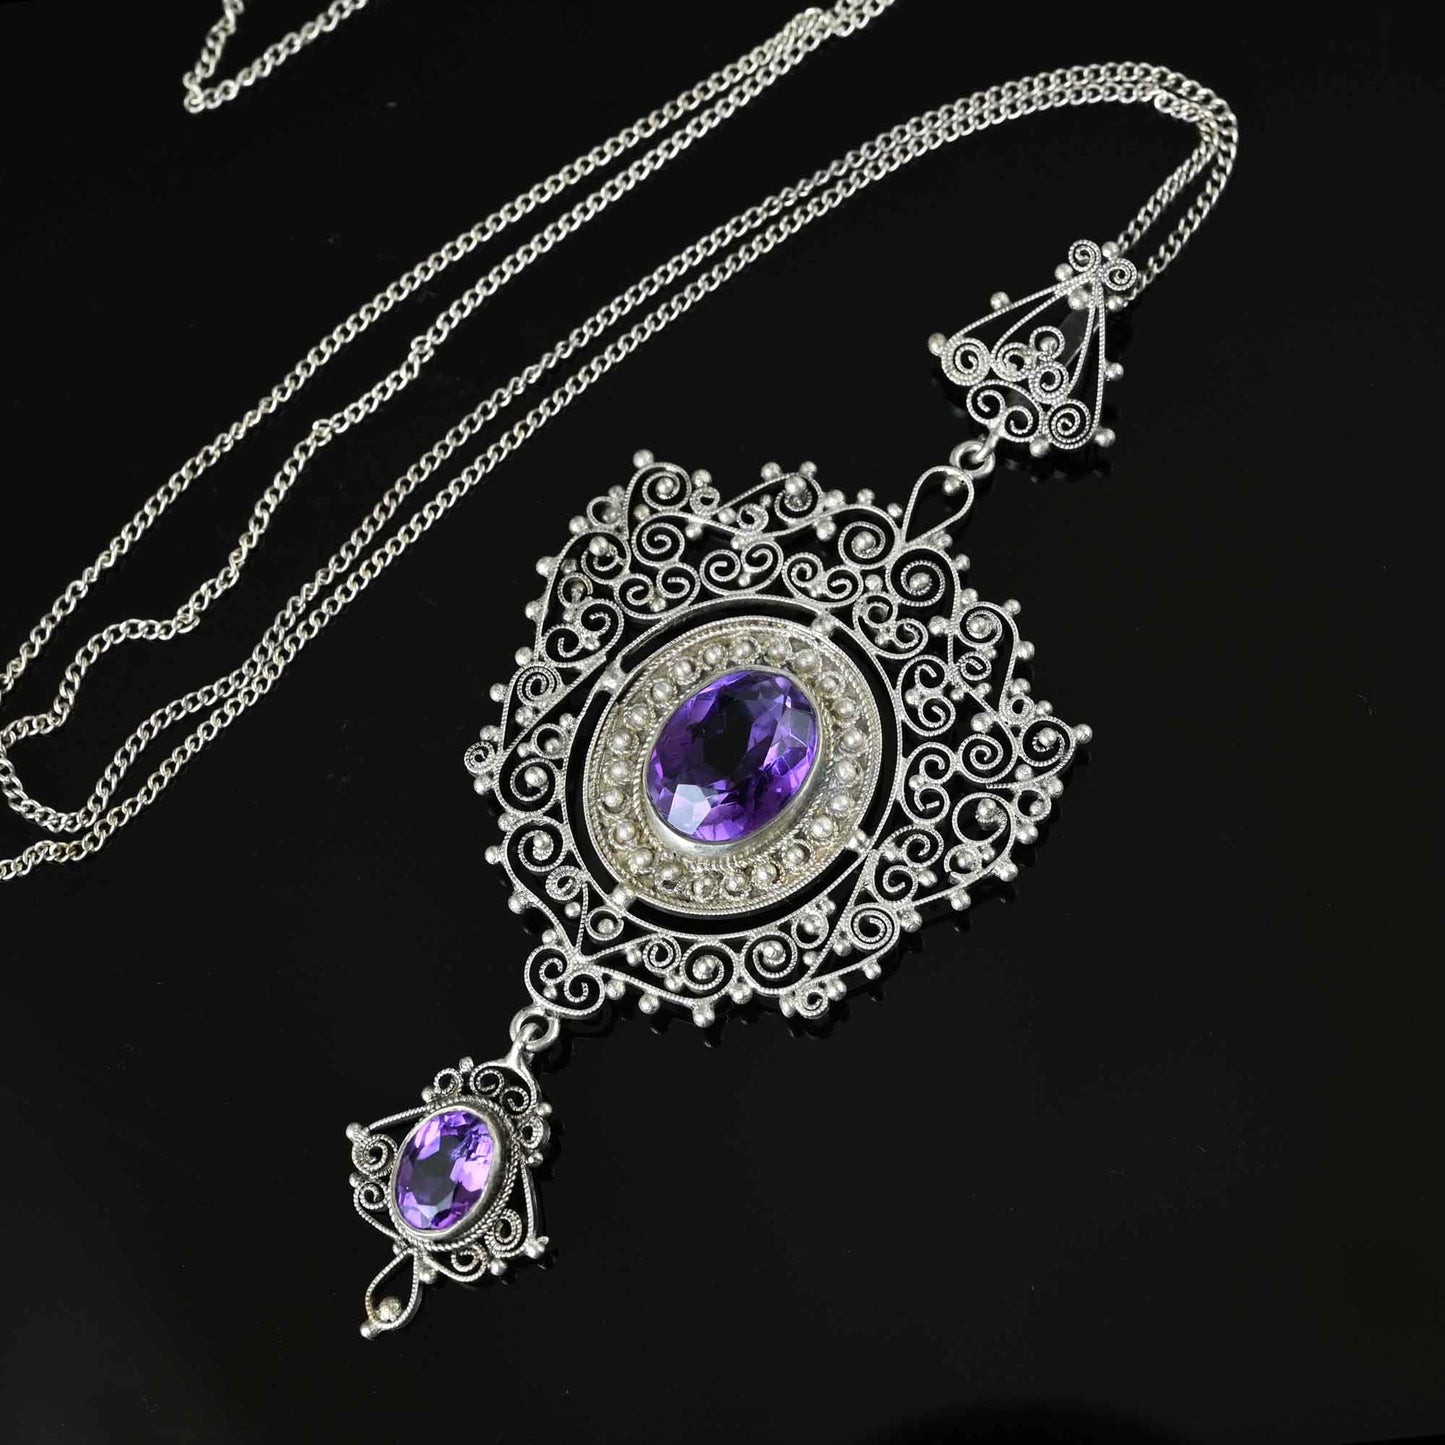 Antique Victorian Silver Filigree Amethyst Necklace - 925 Sterling Silver Necklace